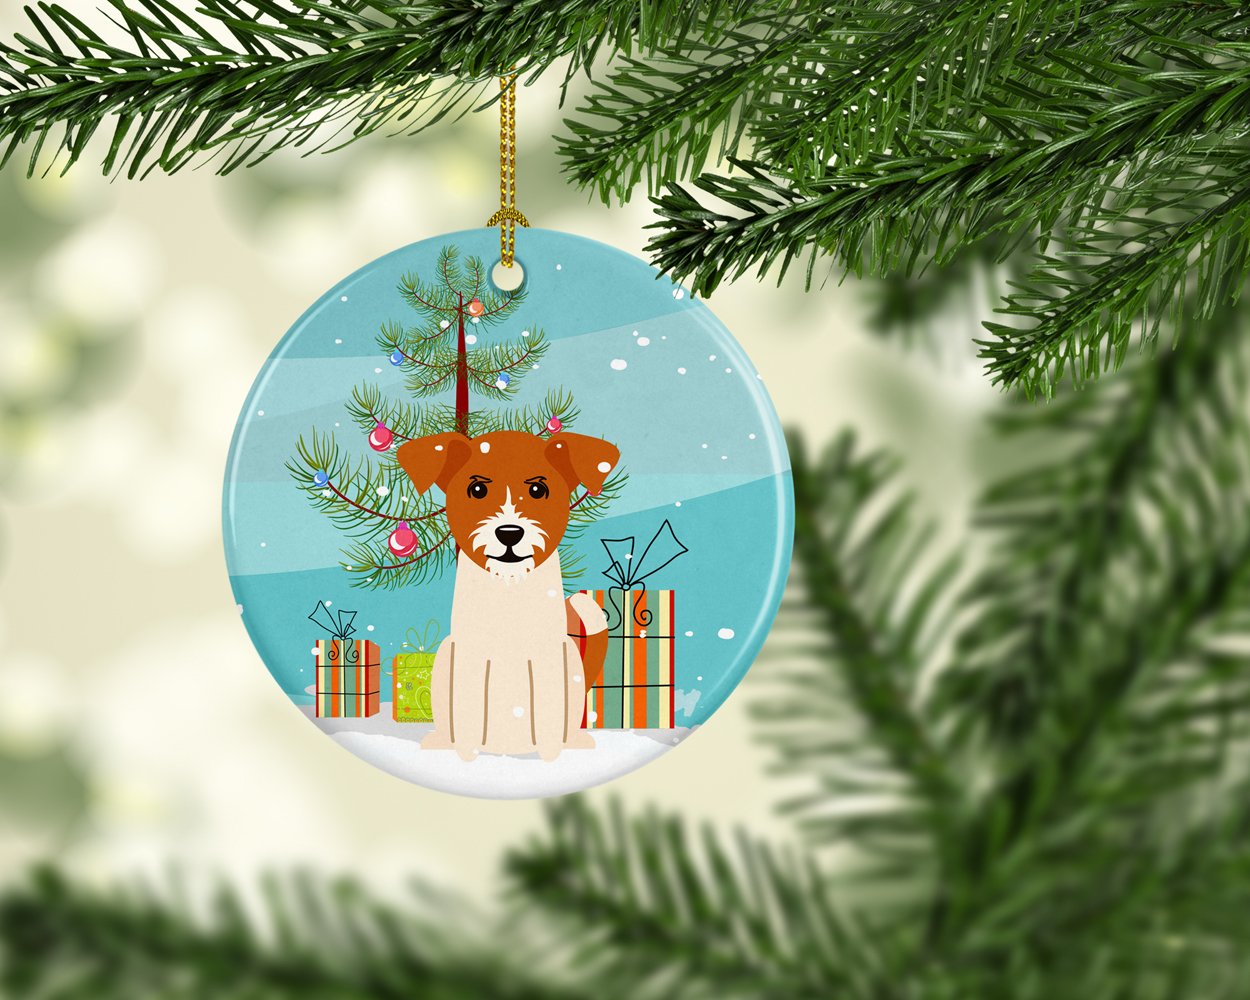 Merry Christmas Tree Jack Russell Terrier Ceramic Ornament BB4233CO1 by Caroline's Treasures